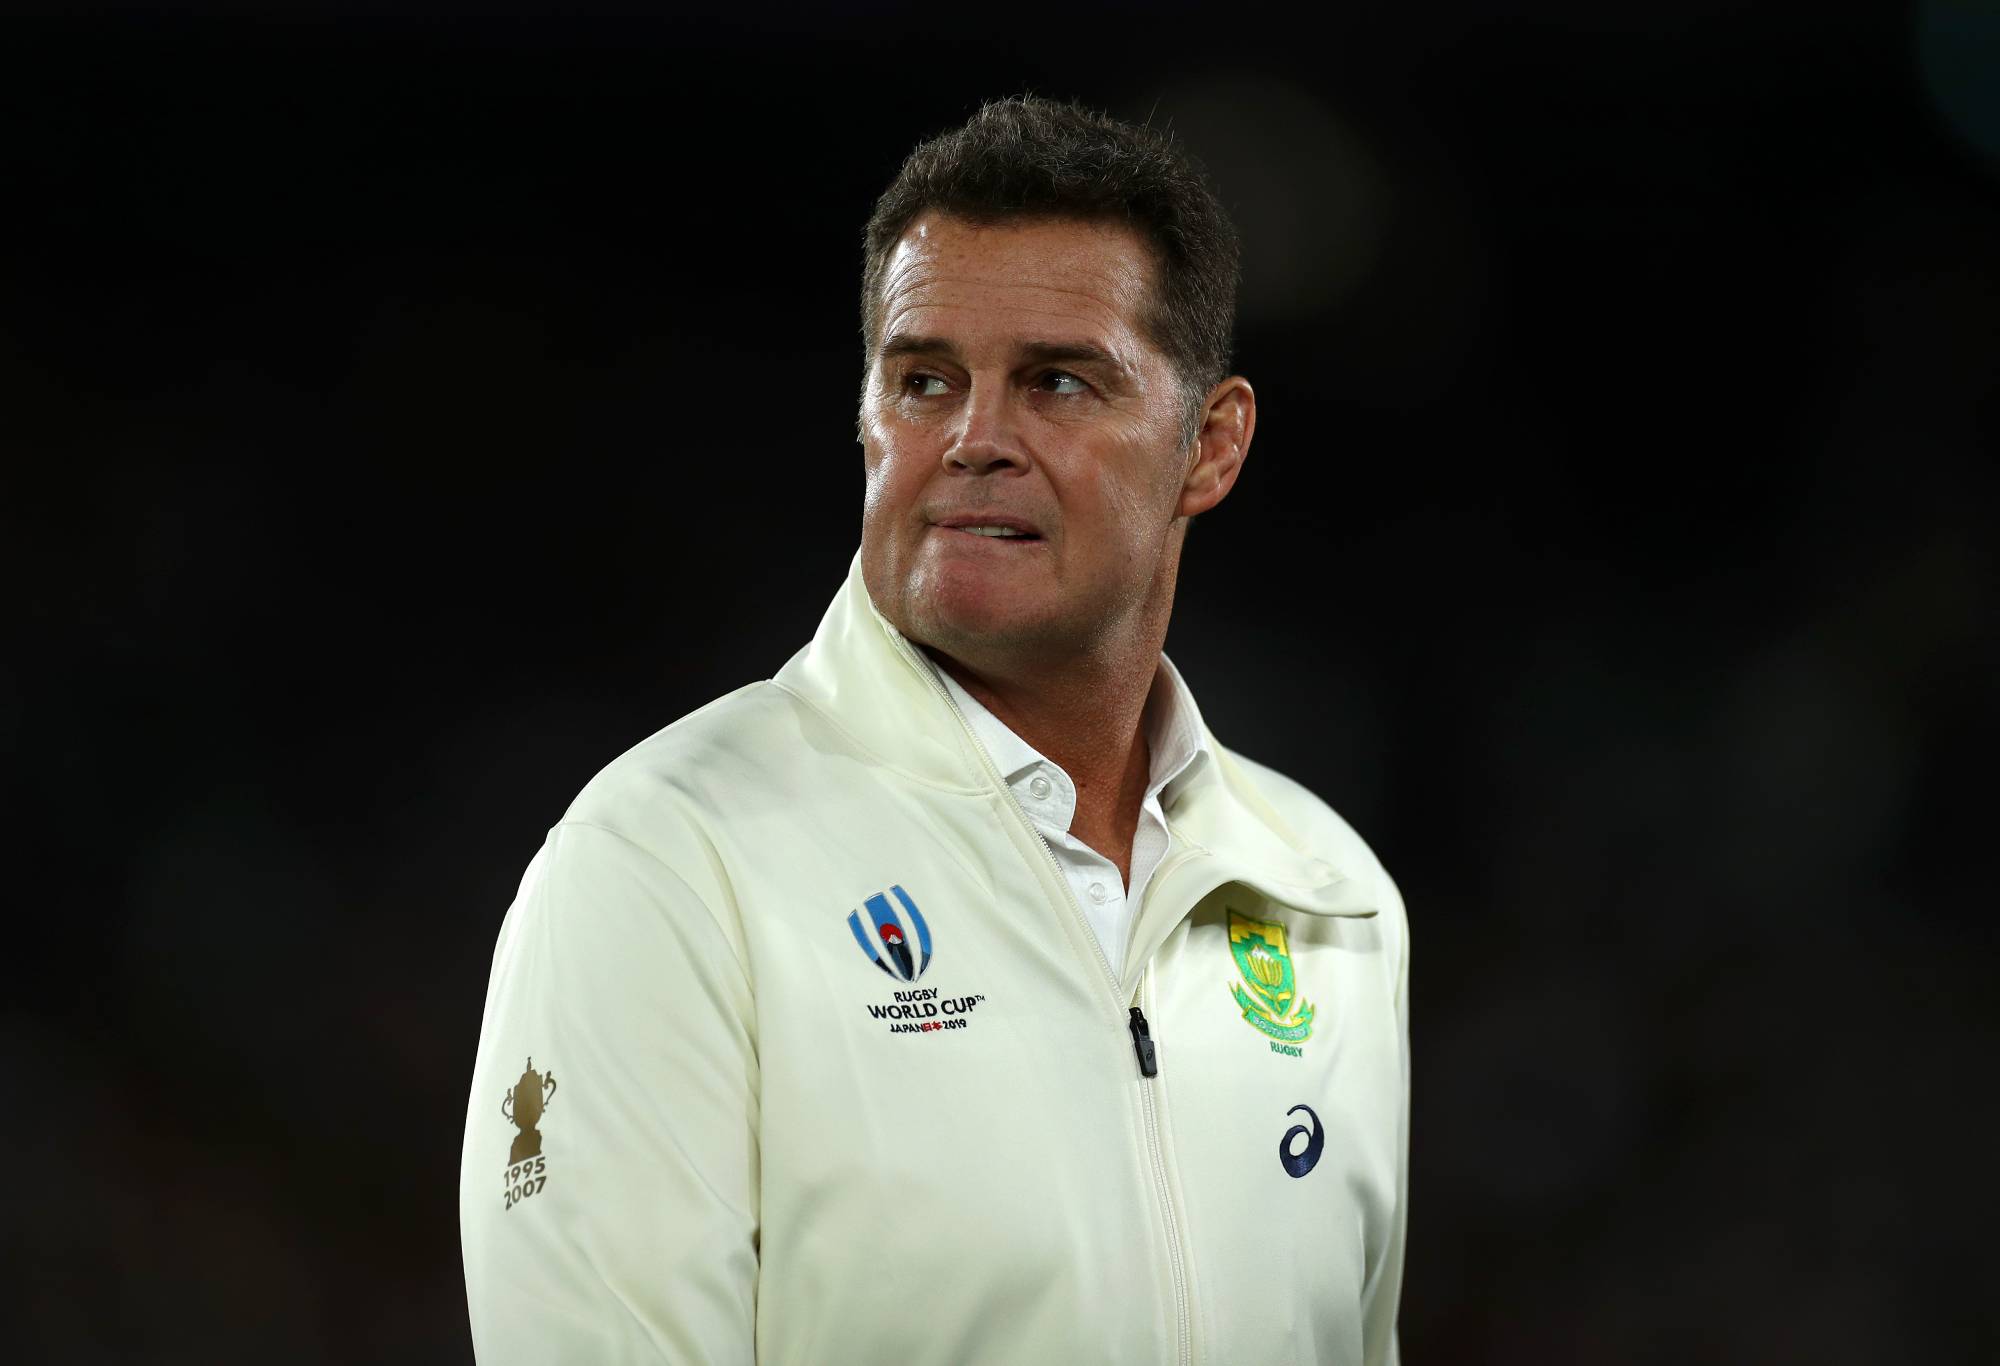 YOKOHAMA, JAPAN - NOVEMBER 02: Rassie Erasmus, Head Coach of South Africa looks on prior to the Rugby World Cup 2019 Final between England and South Africa at International Stadium Yokohama on November 02, 2019 in Yokohama, Kanagawa, Japan. (Photo by Clive Rose - World Rugby/World Rugby via Getty Images)